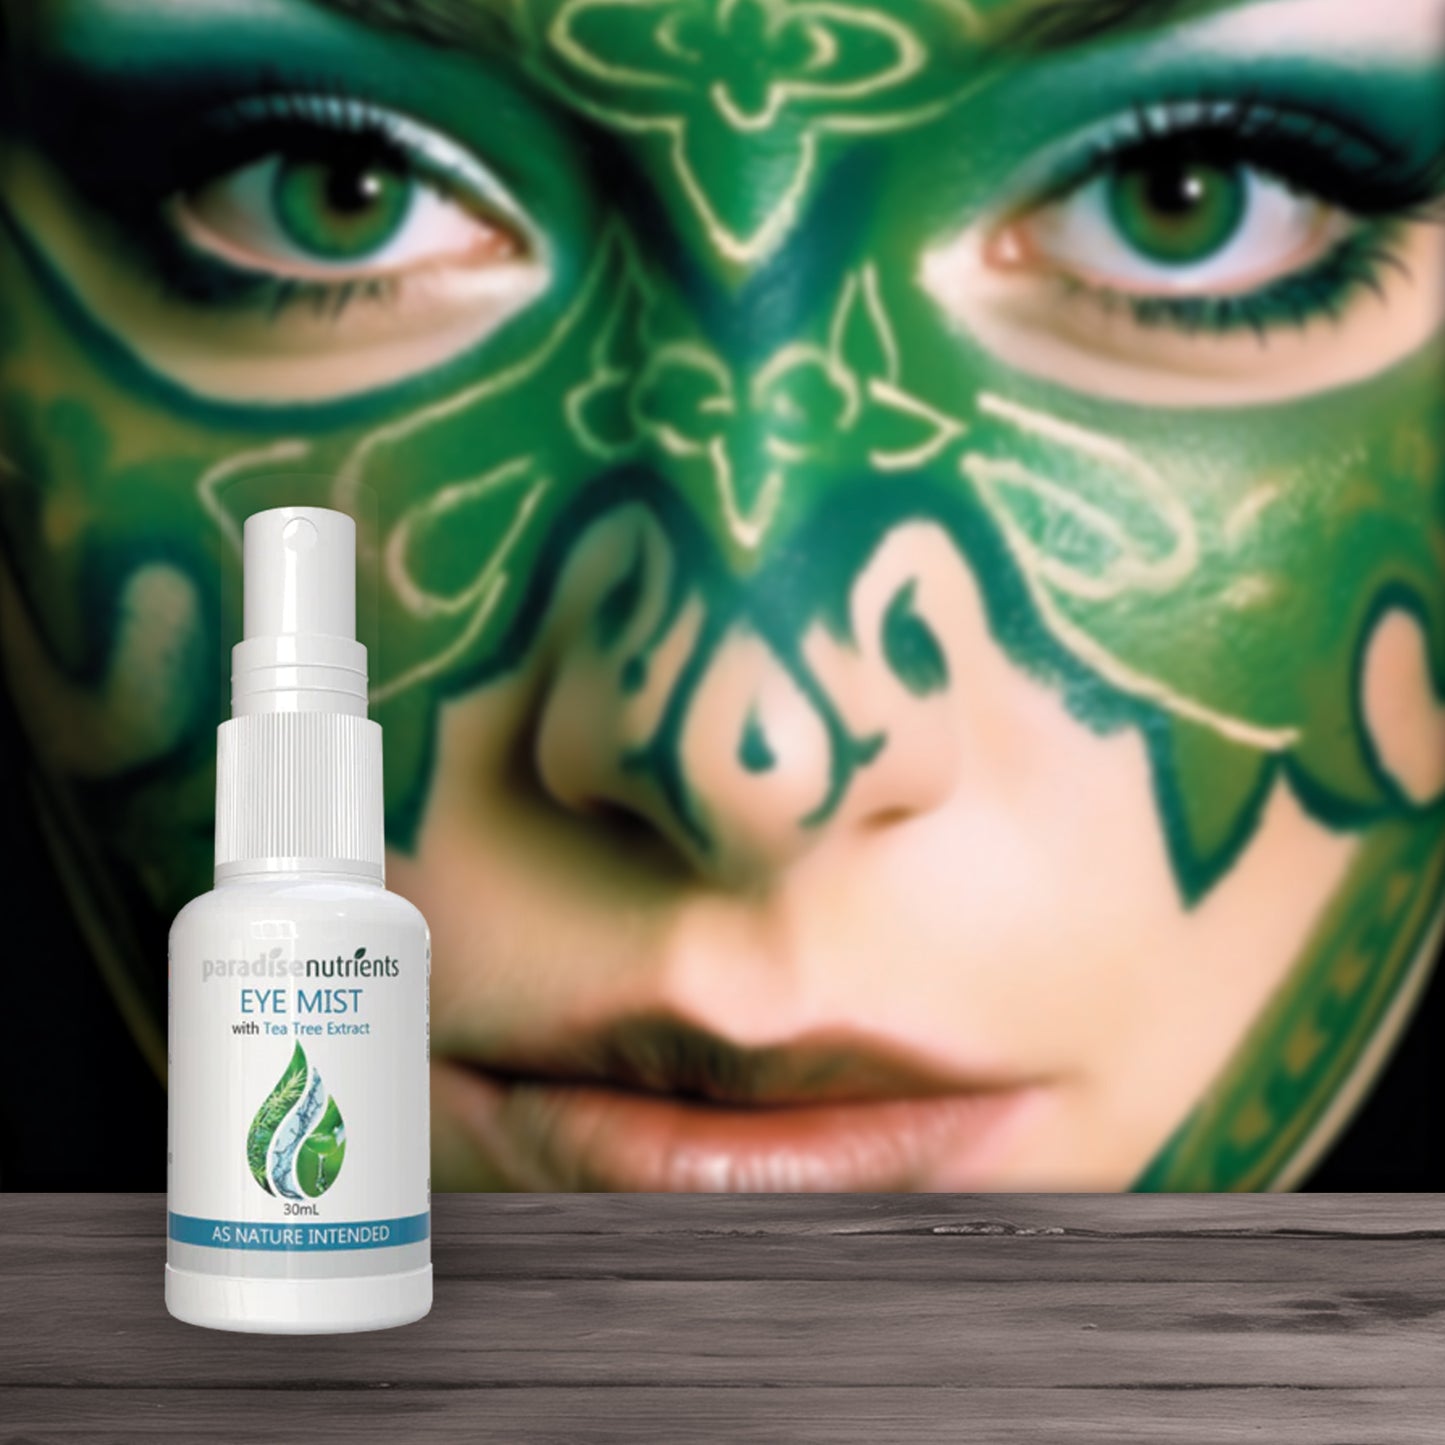 Eye Mist - Paradise Nutrients - More Than Charms